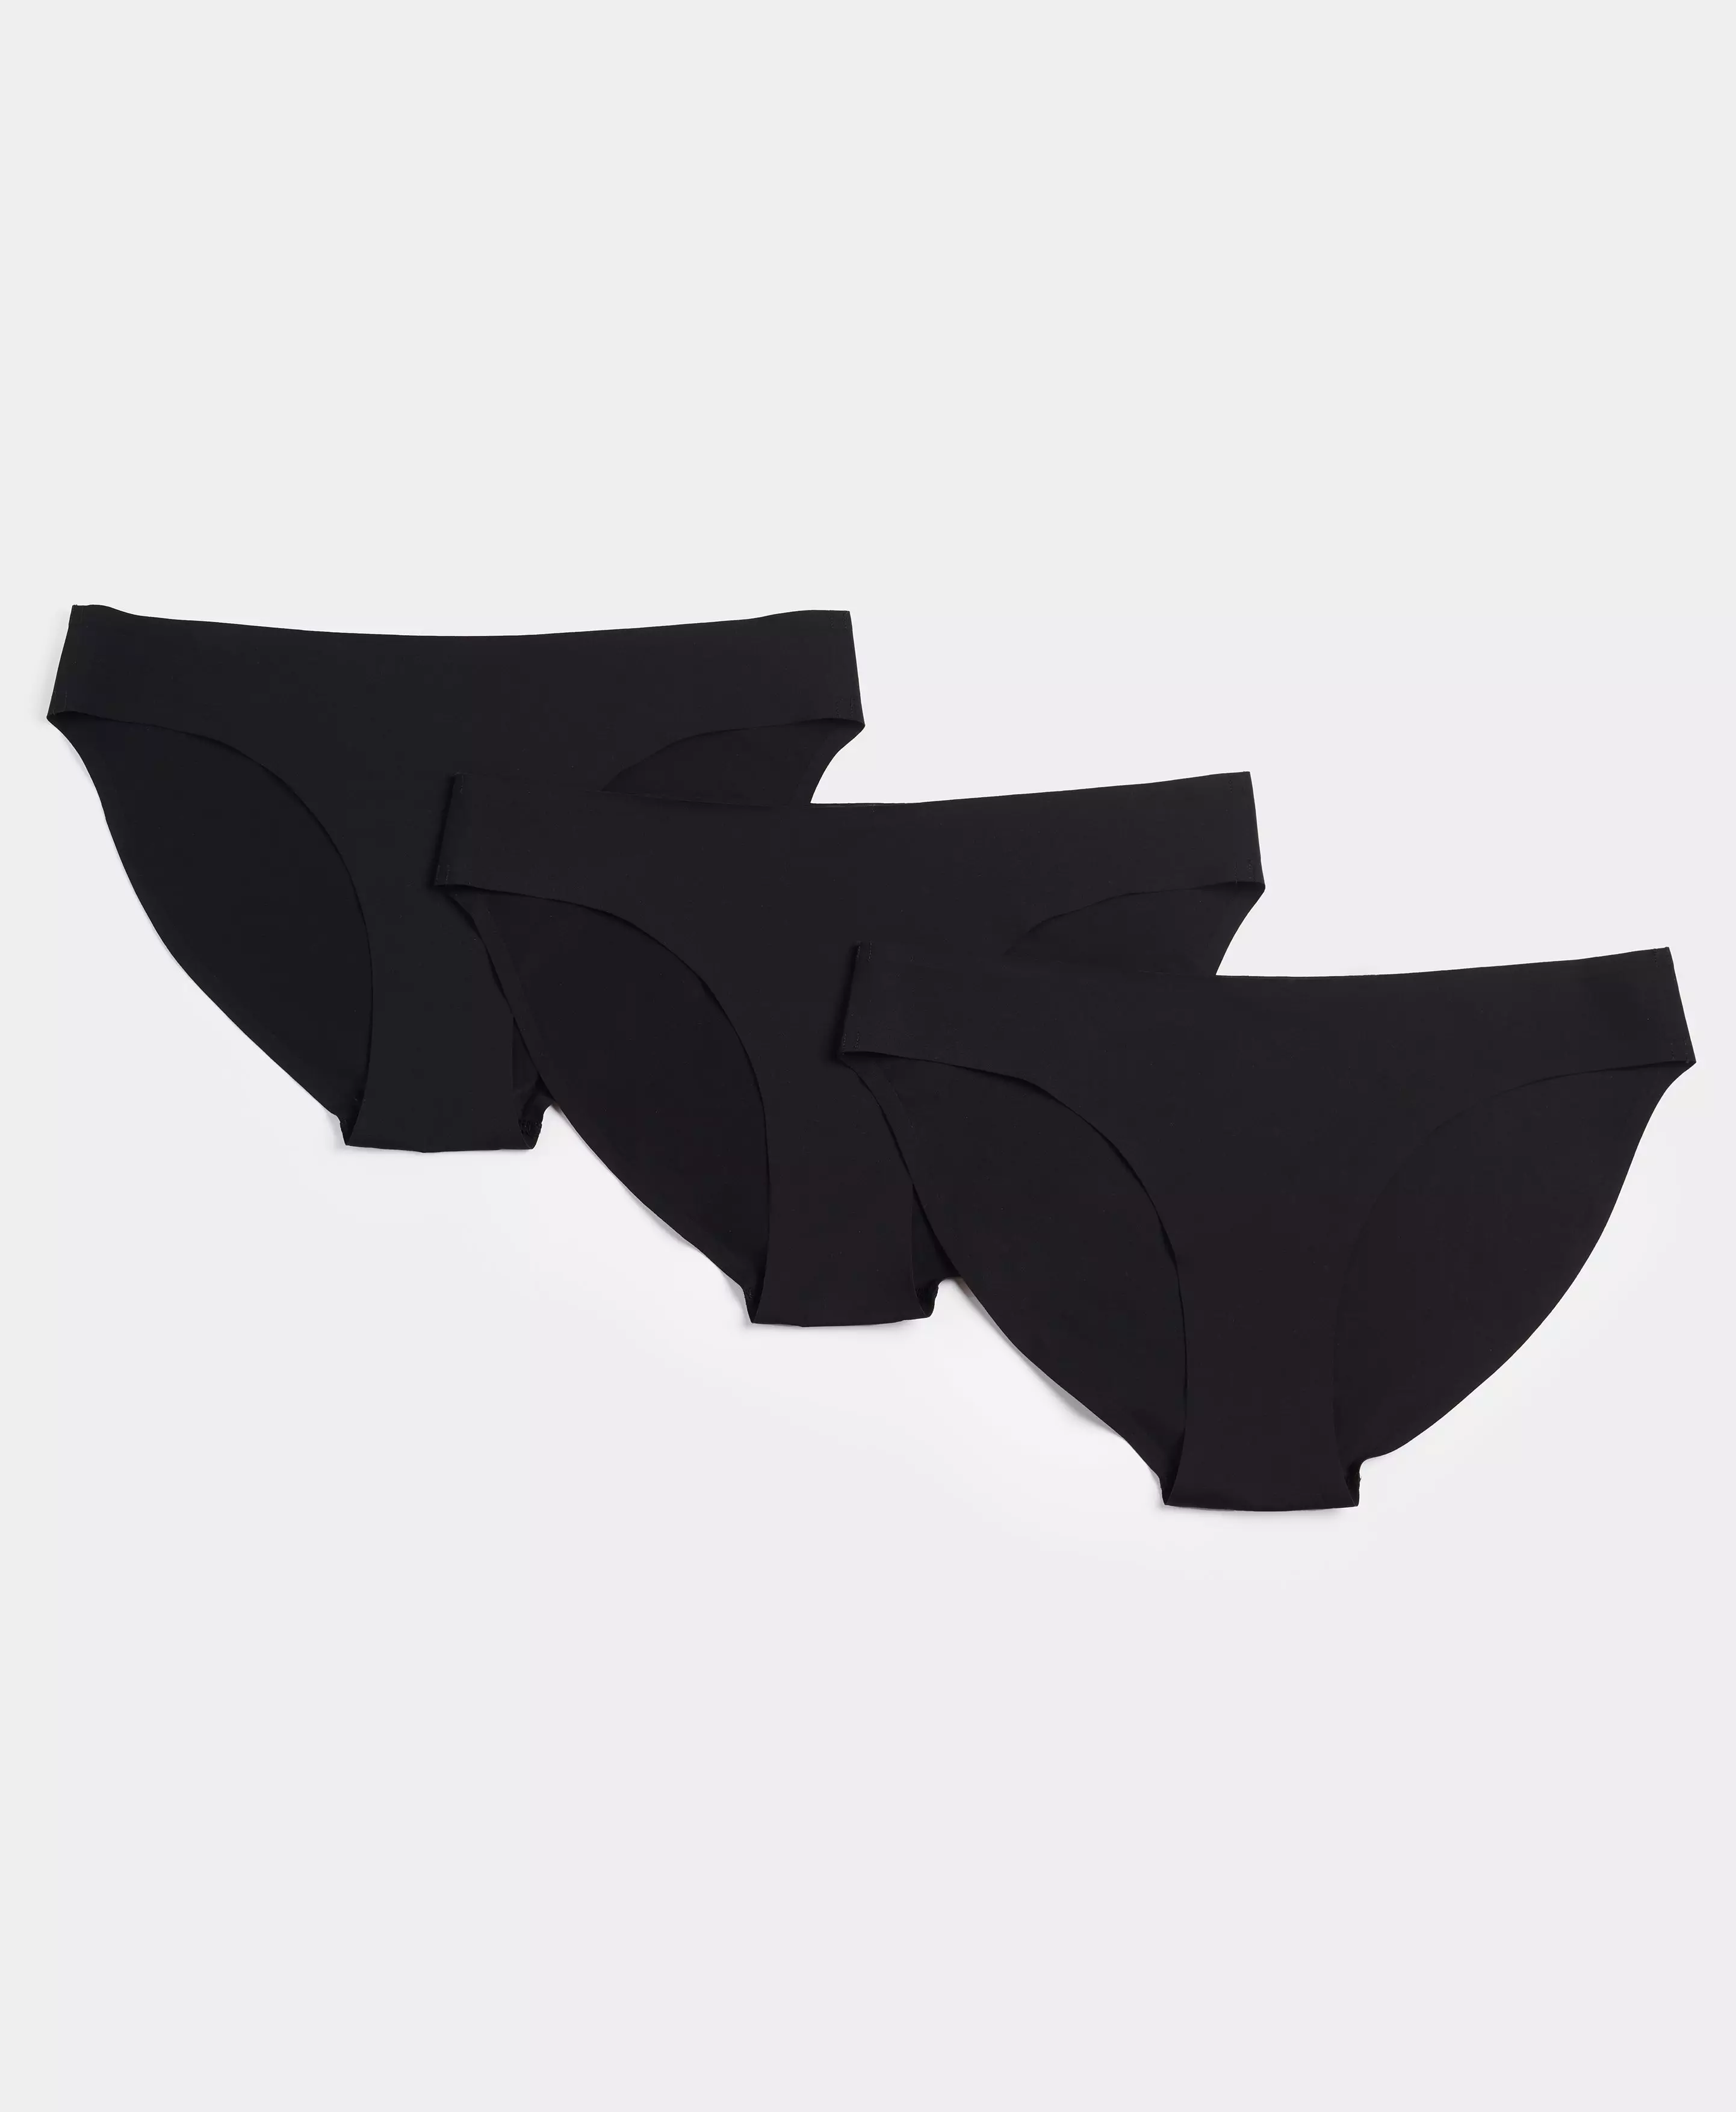 Barely There Briefs - black, Women's Sports Pants & Underwear